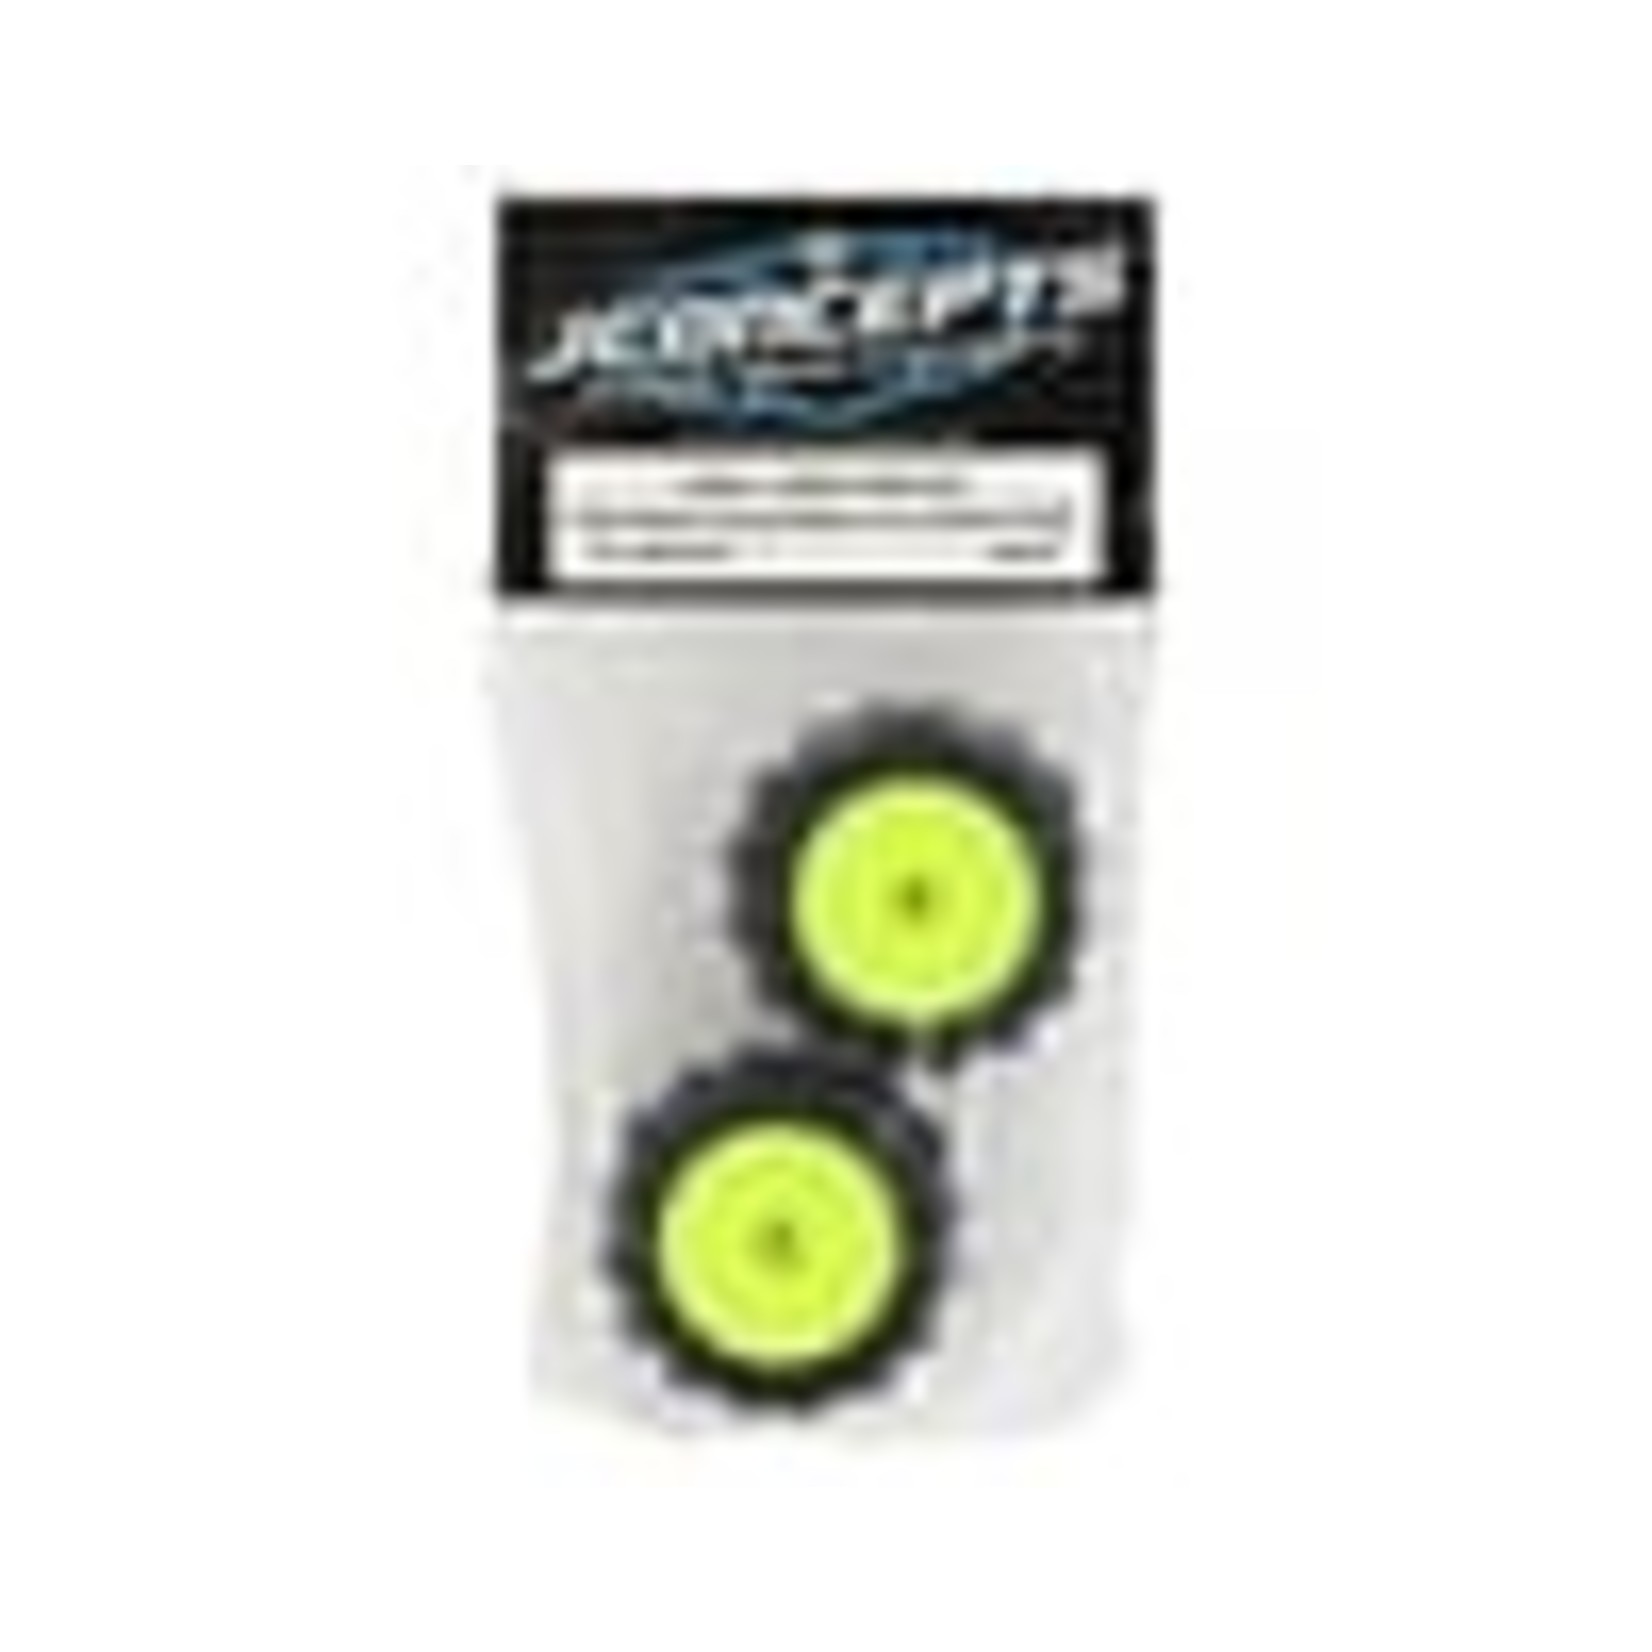 J Concepts JCO4040-2221  Categories related to this product  JConcepts Mini-T 2.0 Animal Pre-Mounted Rear Tires (Yellow) (2) (Green)